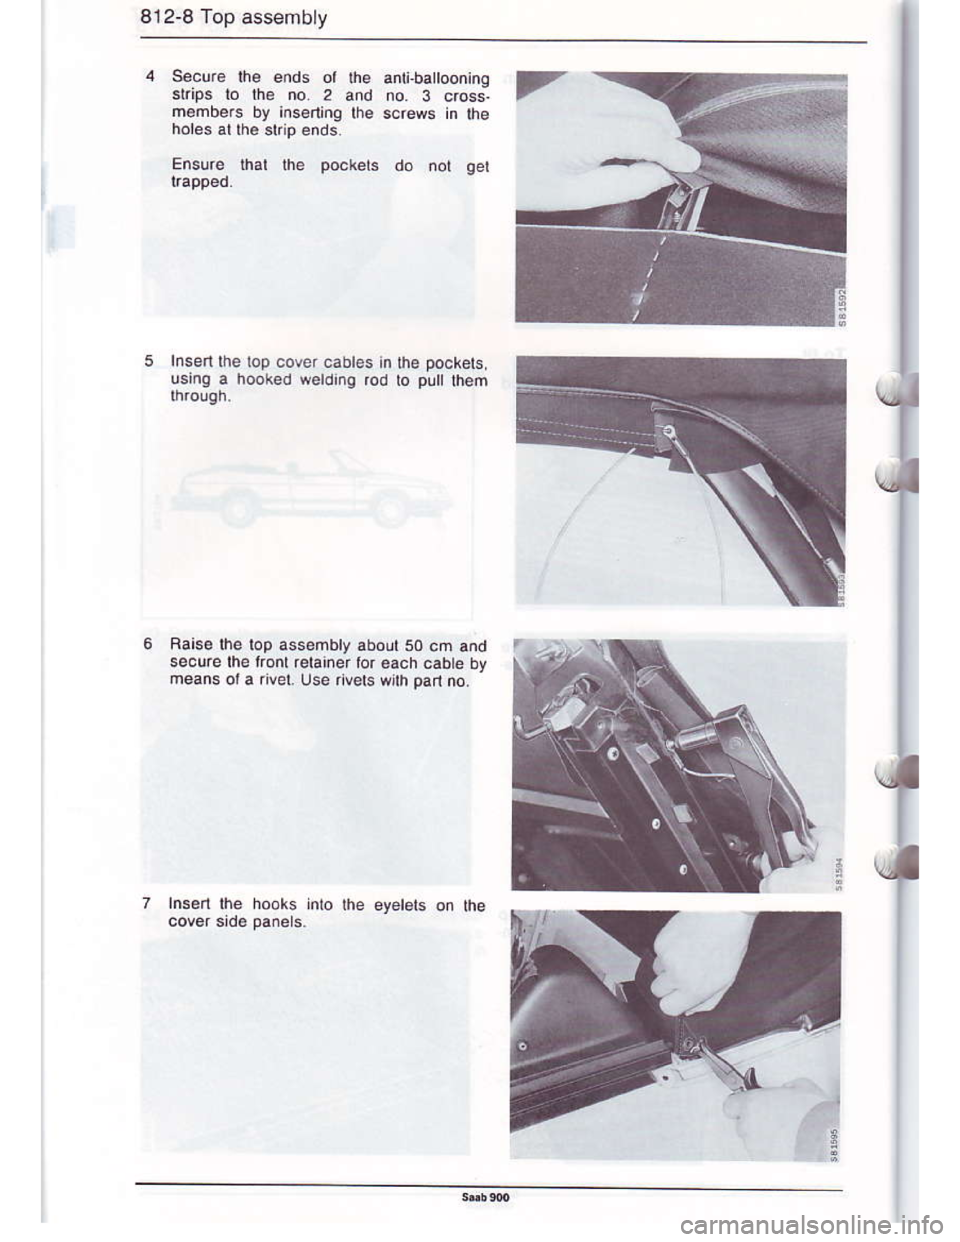 SAAB 900 1986 Owners Guide Downloaded from www.Manualslib.com manuals search engine 812-8 Top assembly
s6cute lha ends ol the anti,ba oonino
skips lo the no. 2 and no. 3 cross.
m€mbe.s by insgning lhe screws in lhe
Ensure tha